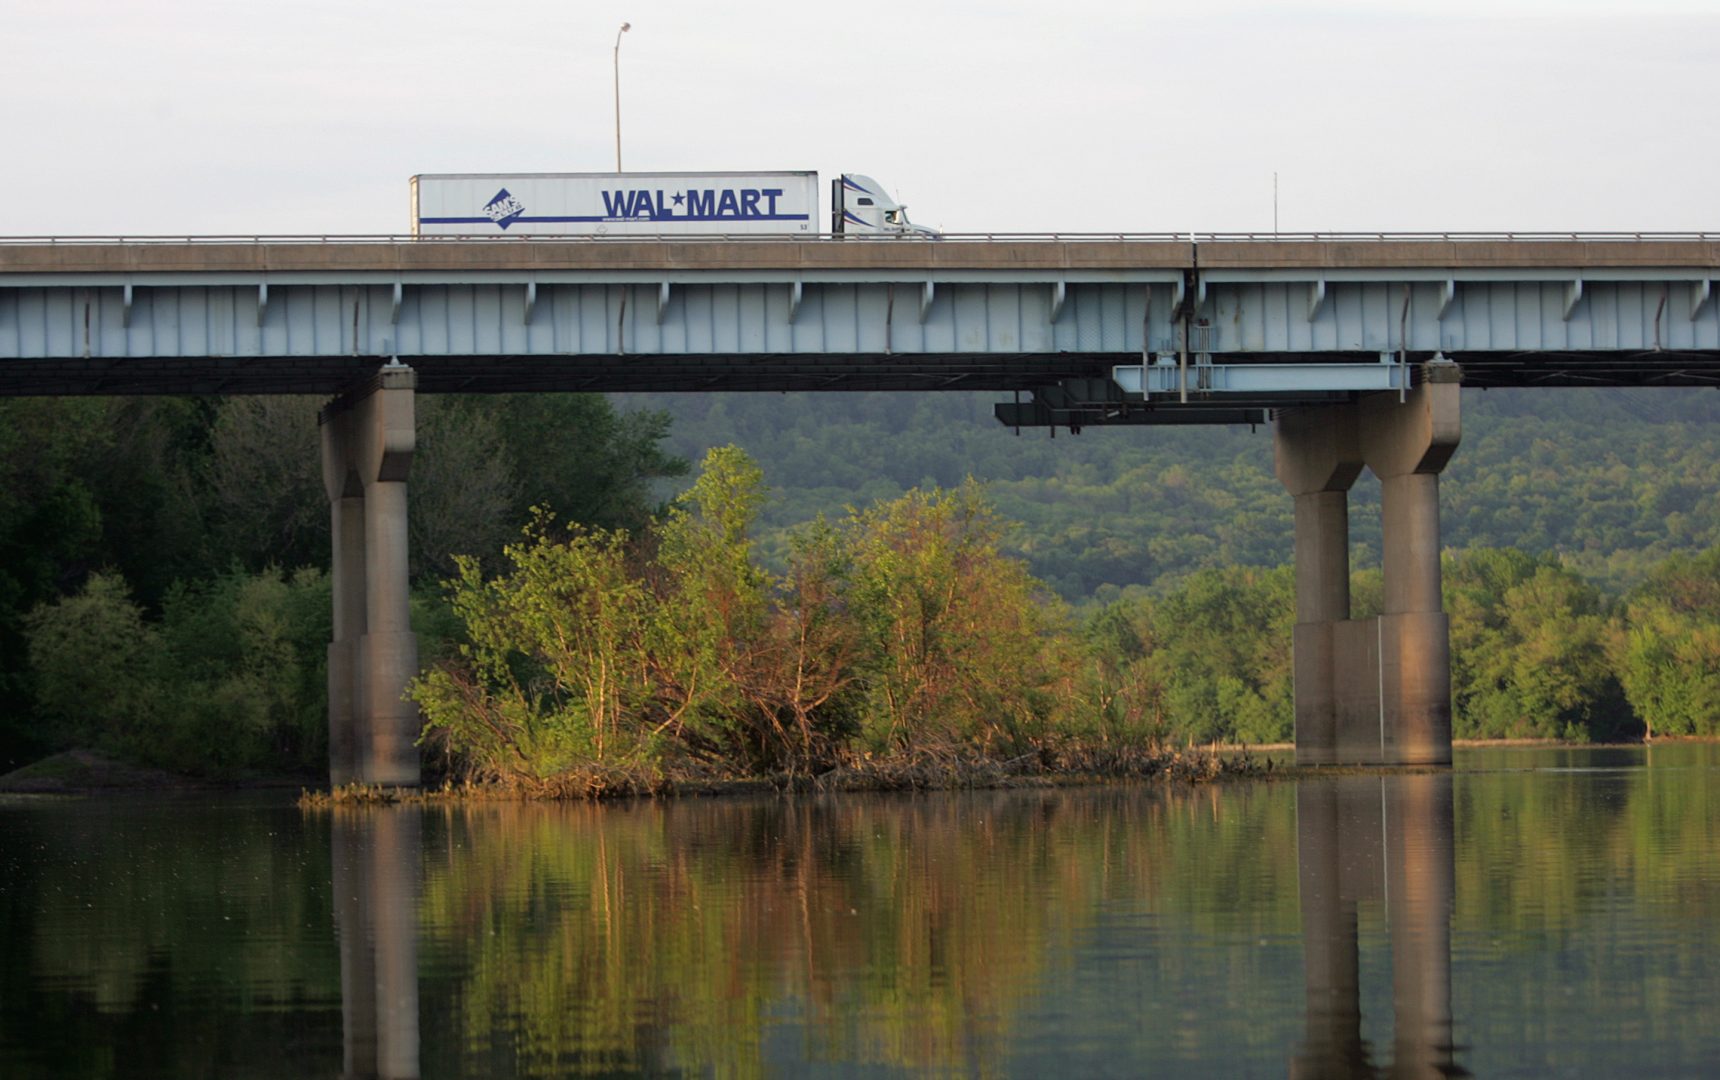 A WalMart truck passes over the Susquehanna River on Interstate 81 in Harrisburg, Pa., Tuesday May 9, 2006.